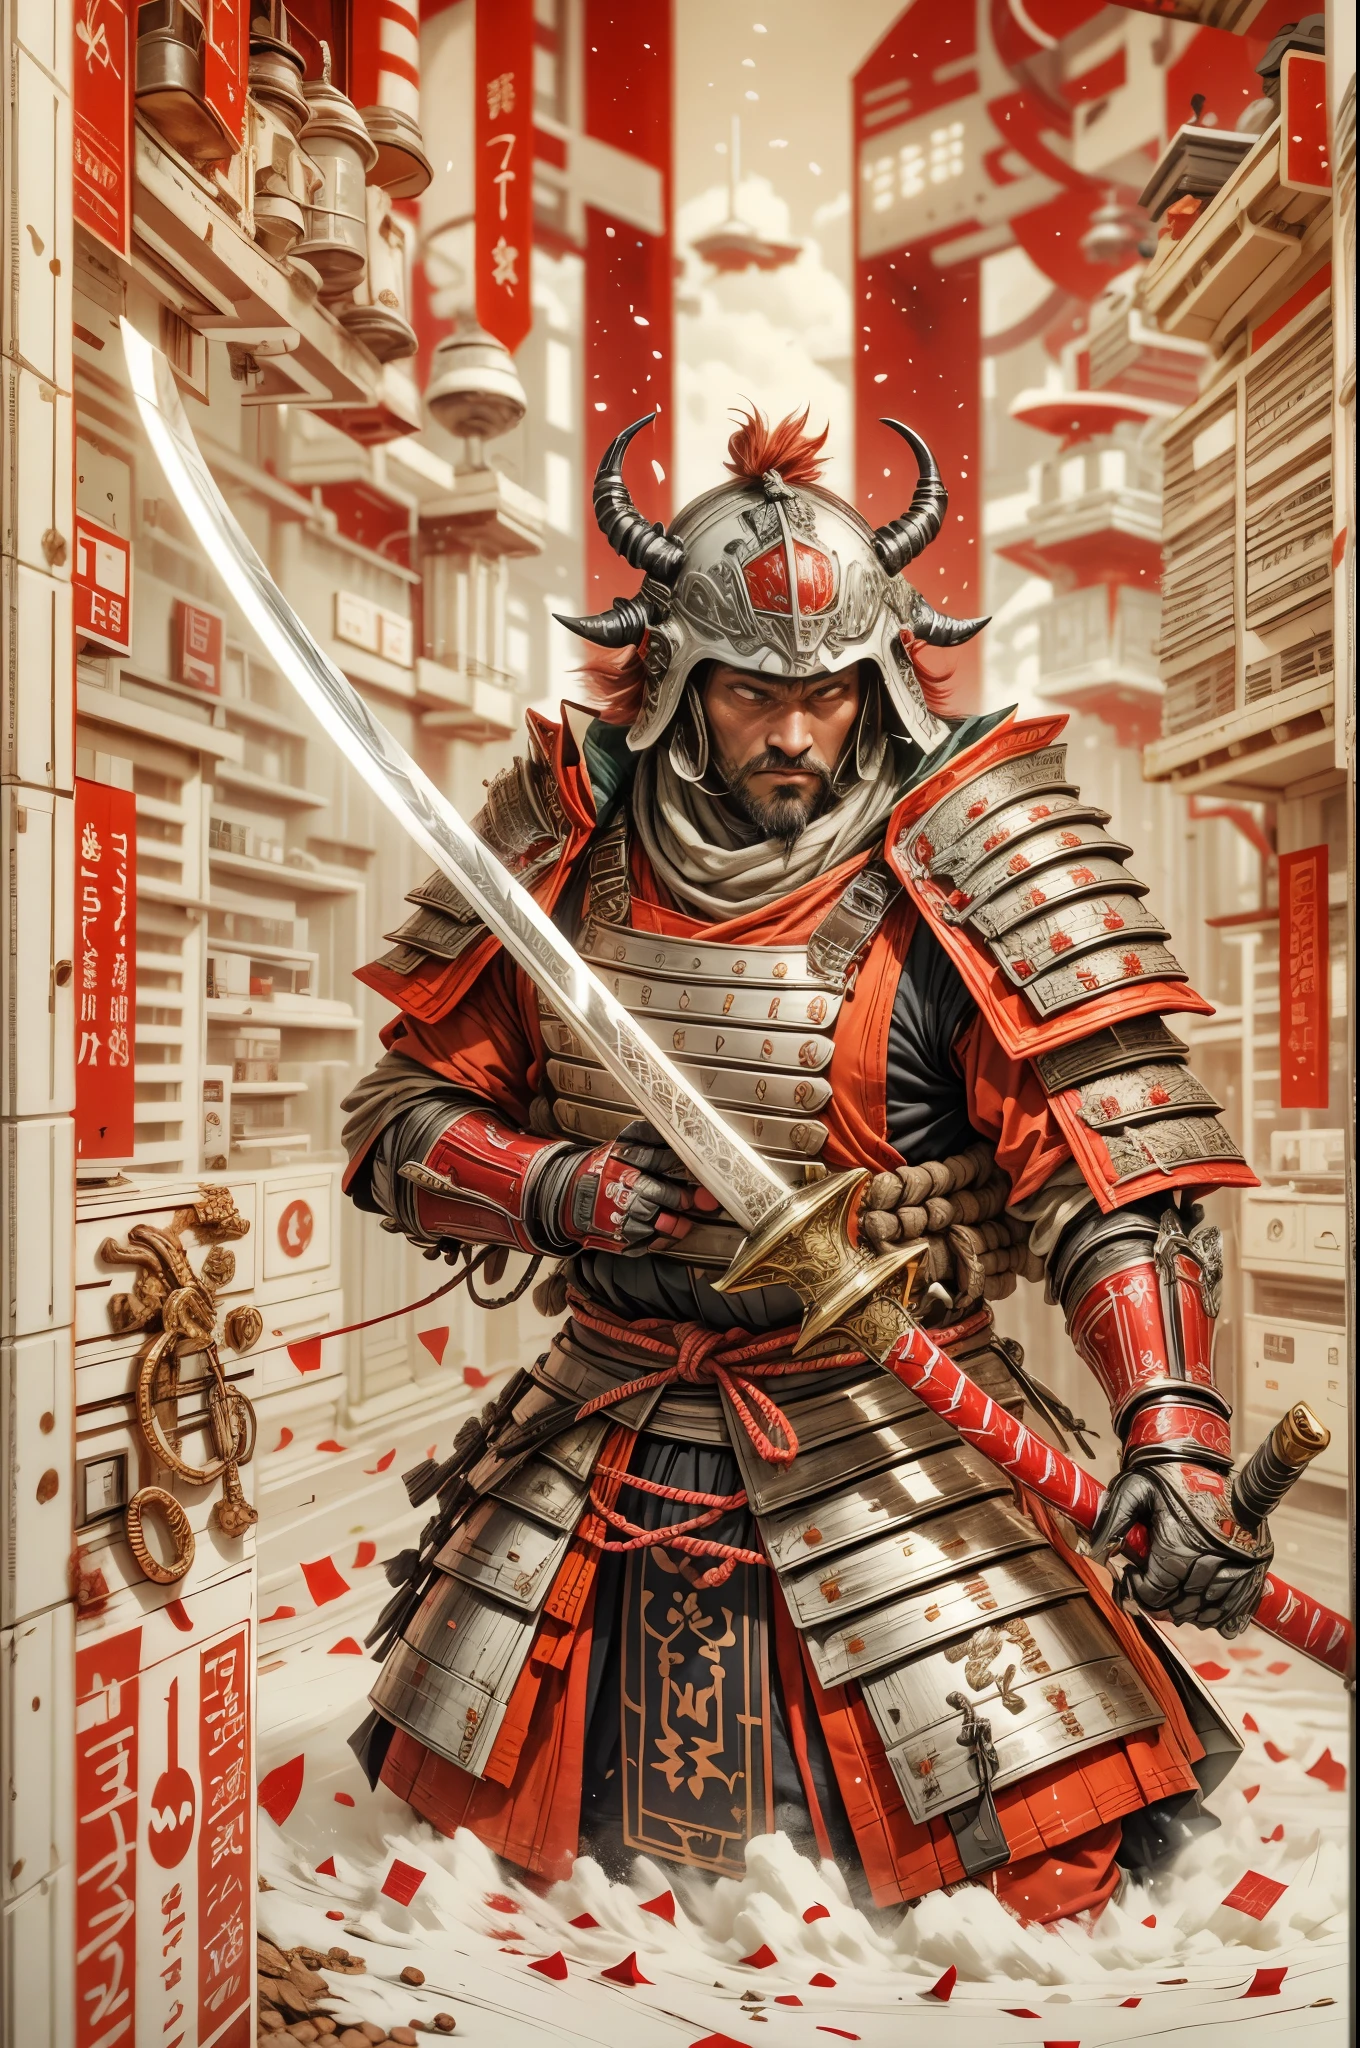 japanese samurai，samurai armor，red white，With a huge knife，fighting stance，katana focus，space city background，